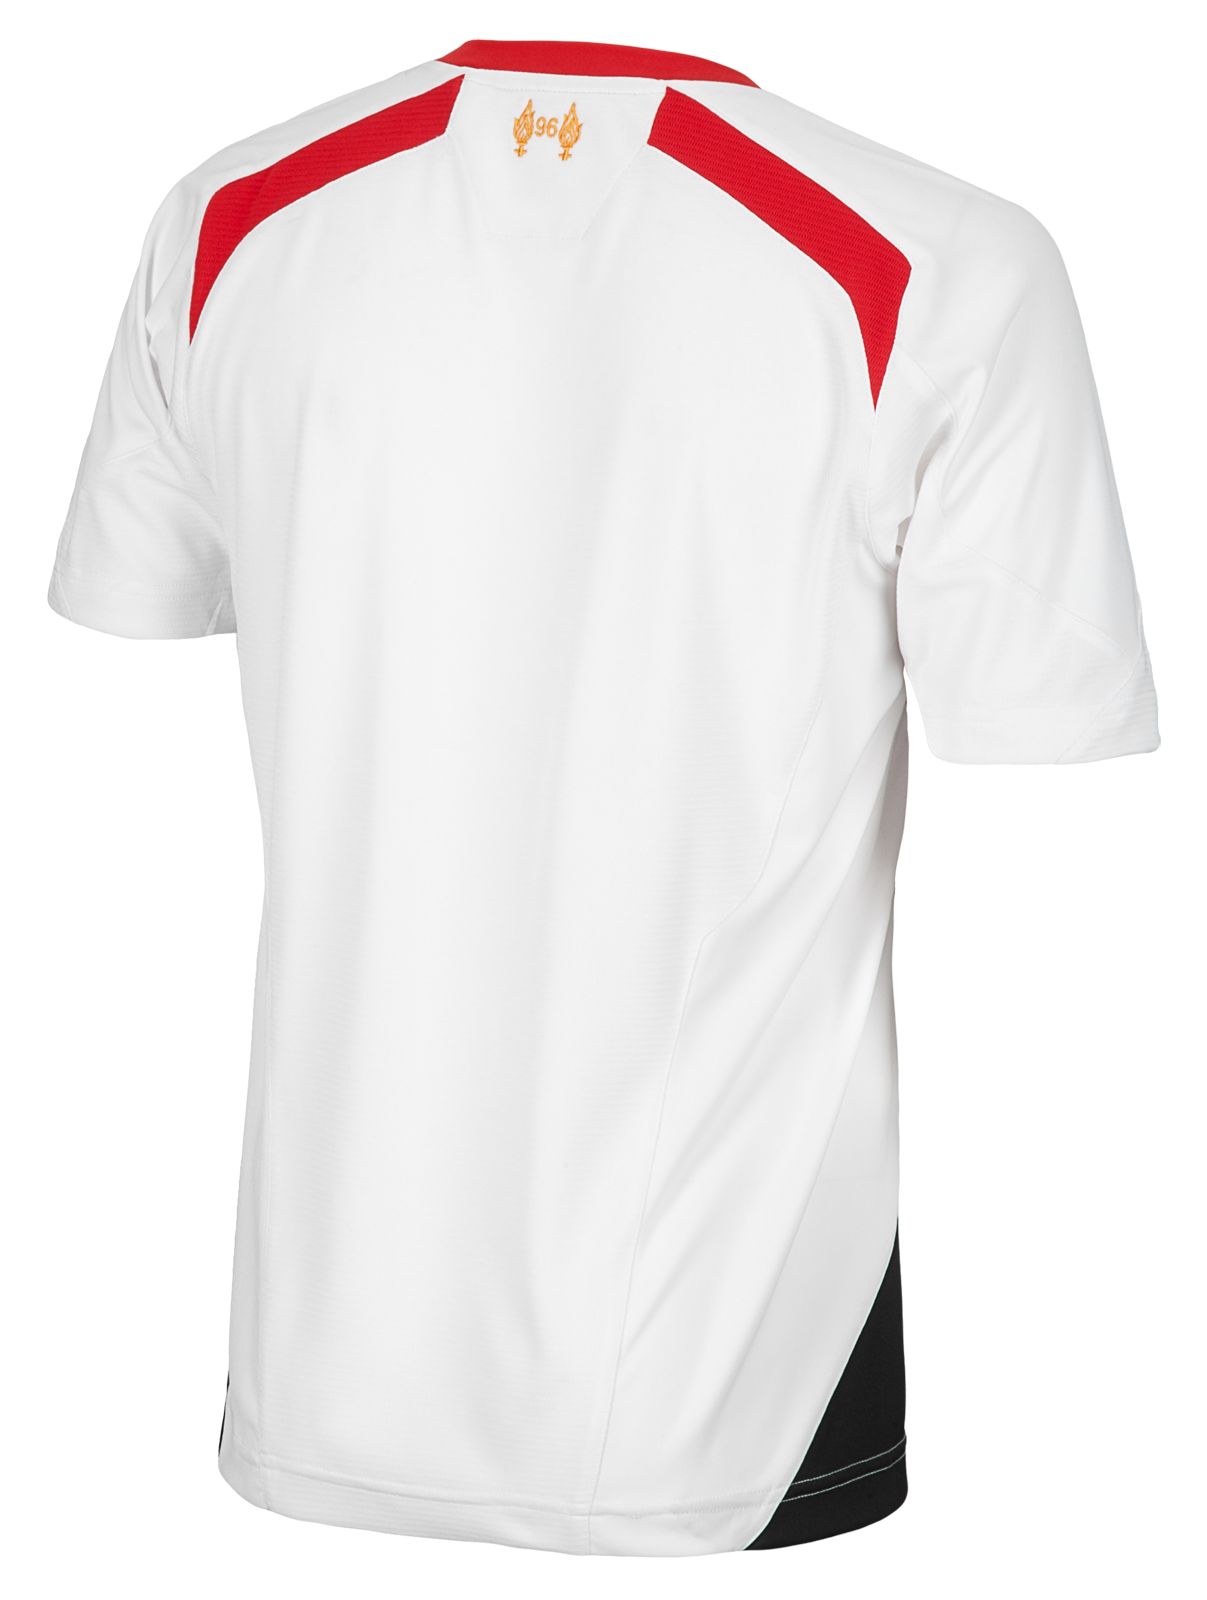 Liverpool Away Junior Short Sleeve Jersey 2013/14, White with Anthracite & High Risk Red image number 0